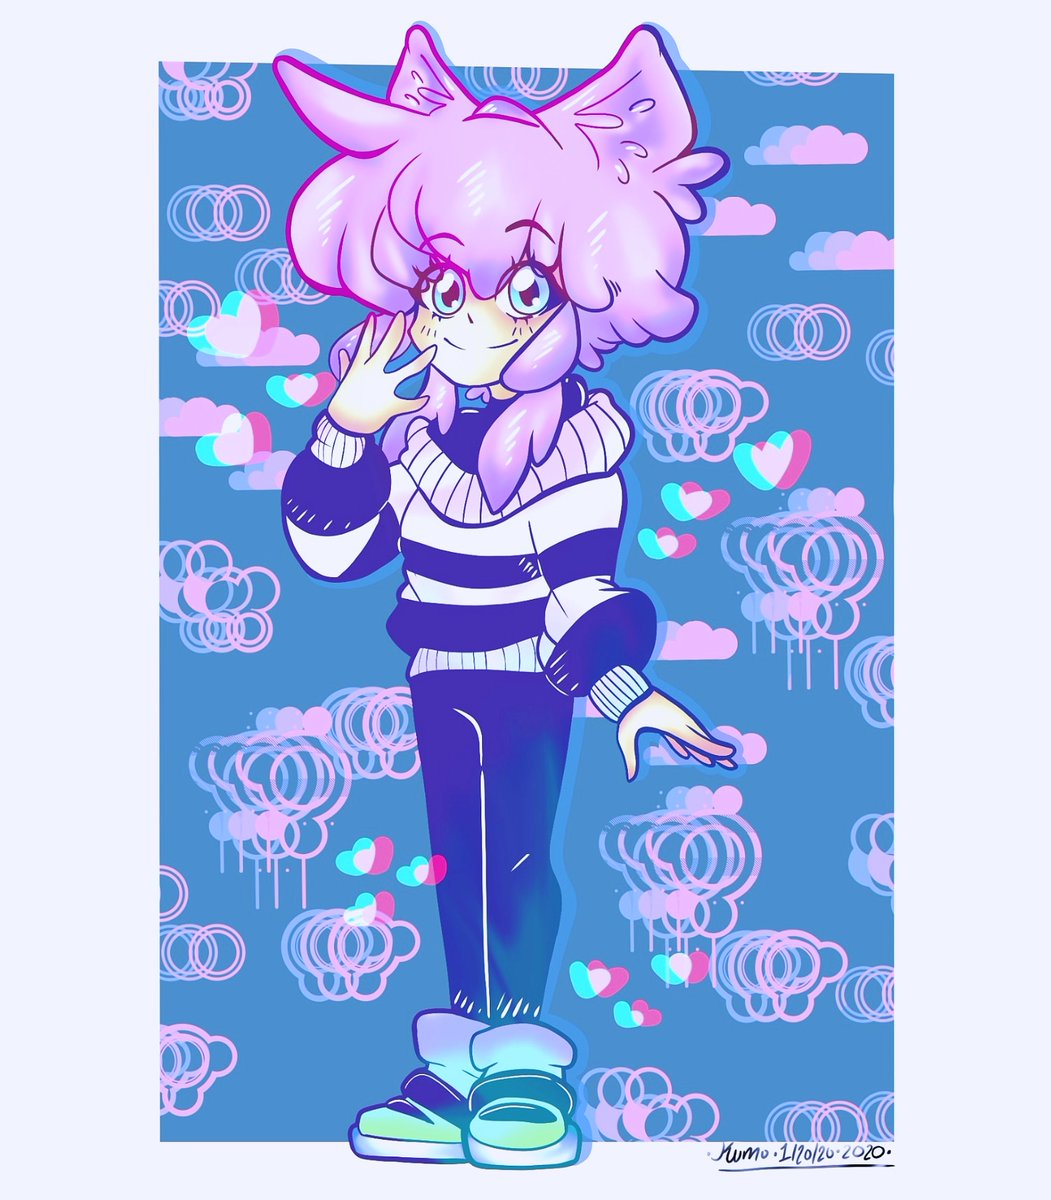 Dude, Messing around with the brushes is so much fun on my tablet! This Pastel Lo-Fi style is killing it with Milo in it! 
#art #artist #digital #digitalart #pastel #pastelhair #pastelaesthetic #aesthetic #aesthetics #lofi #hearts #color #colors #satisfying #Milo #milo #Oc